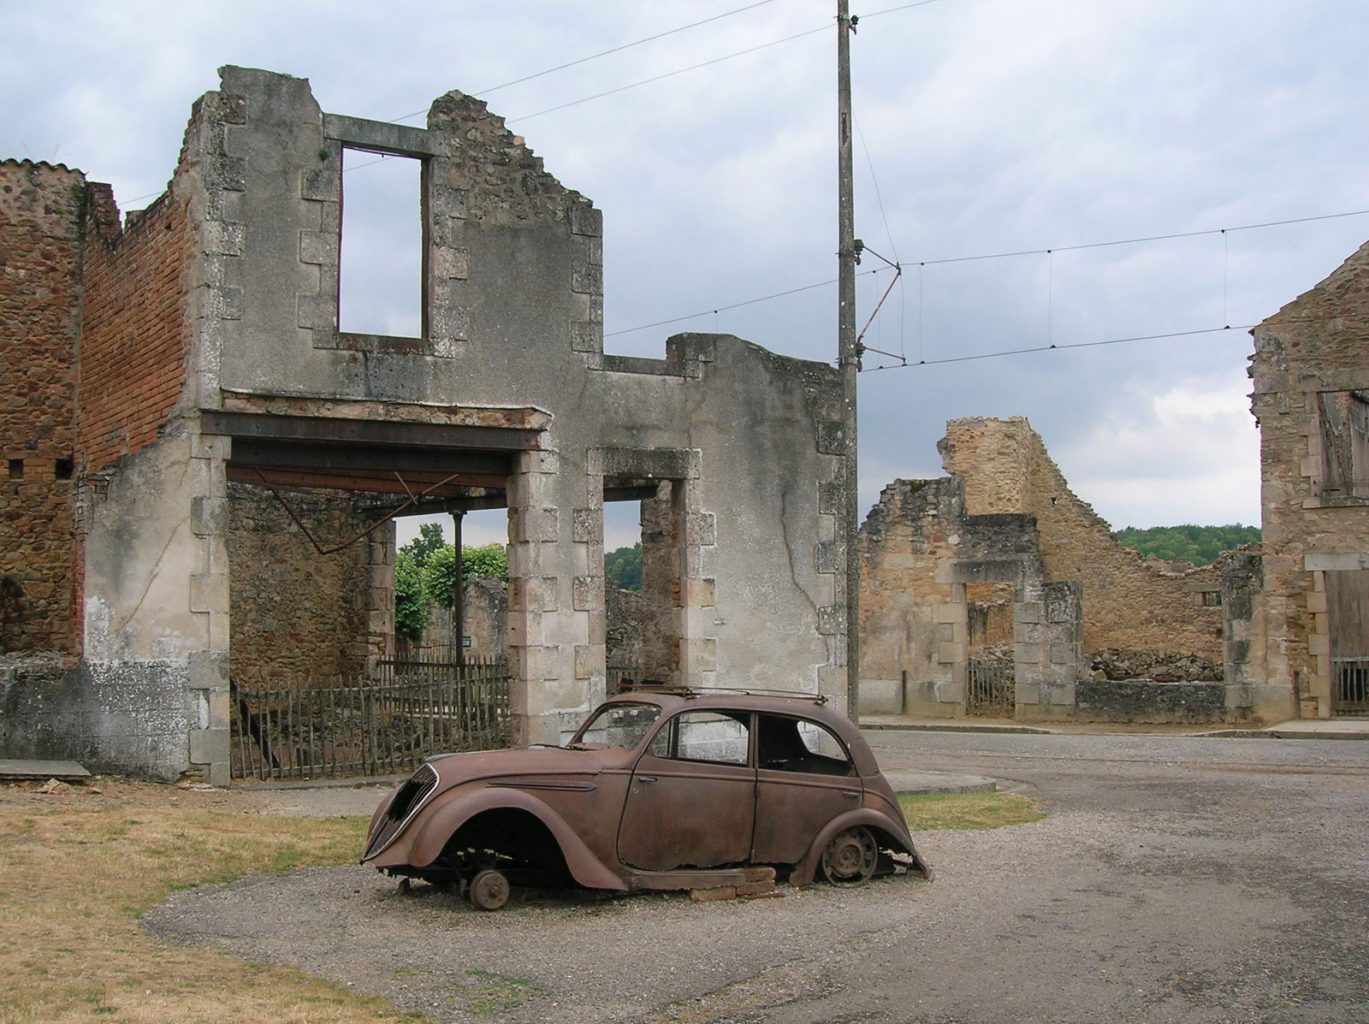 A burned out car in front of the ruins of a building